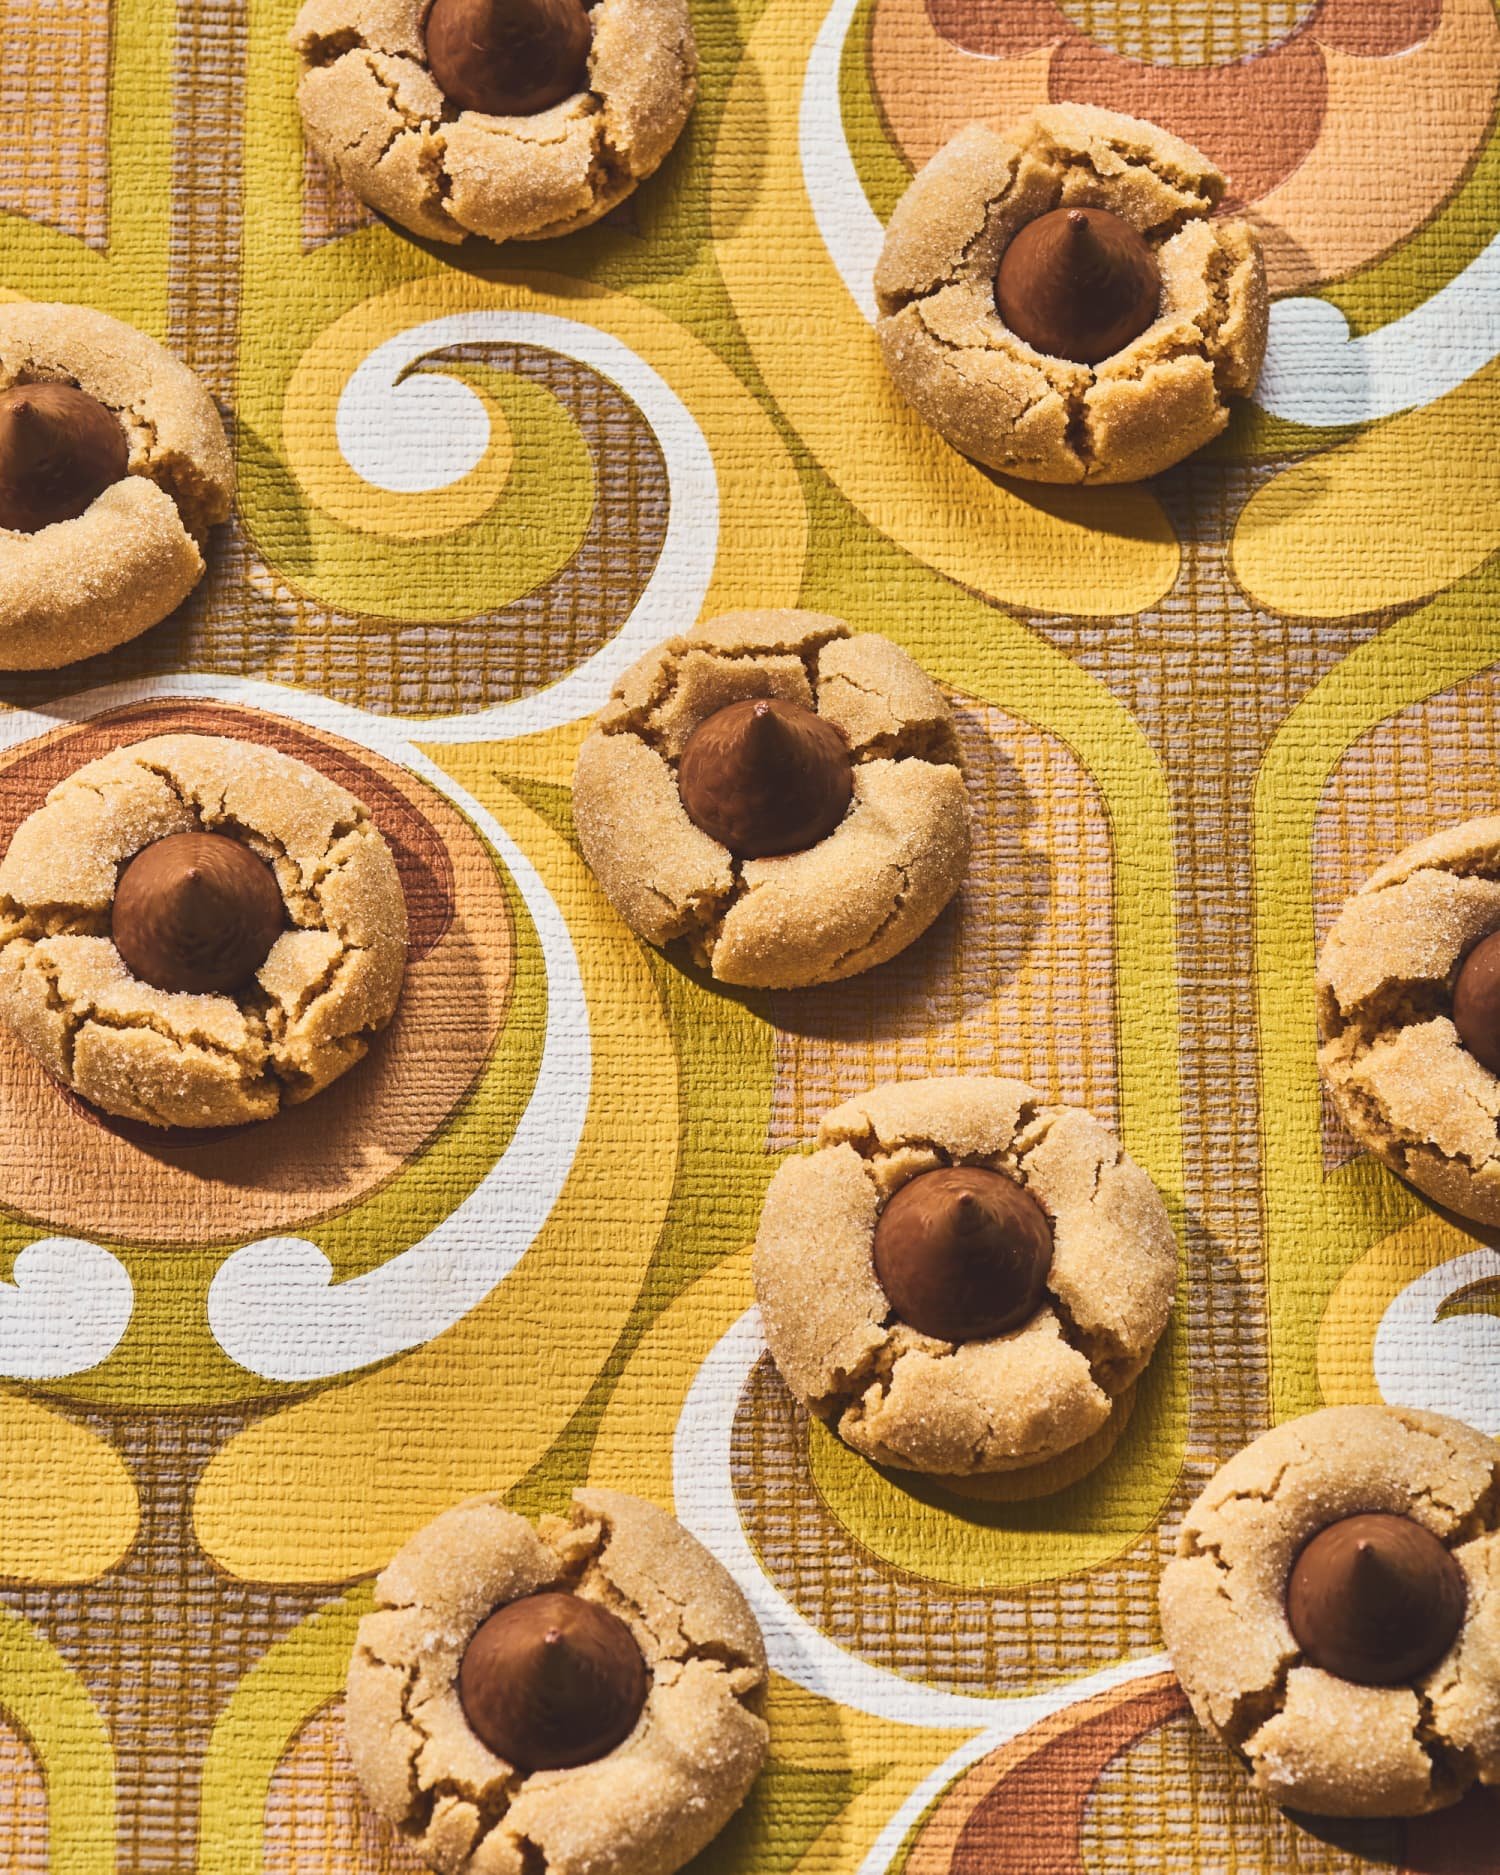 This Classic Cookie Lost the Pillsbury Bake-Off, but Won Our Hearts